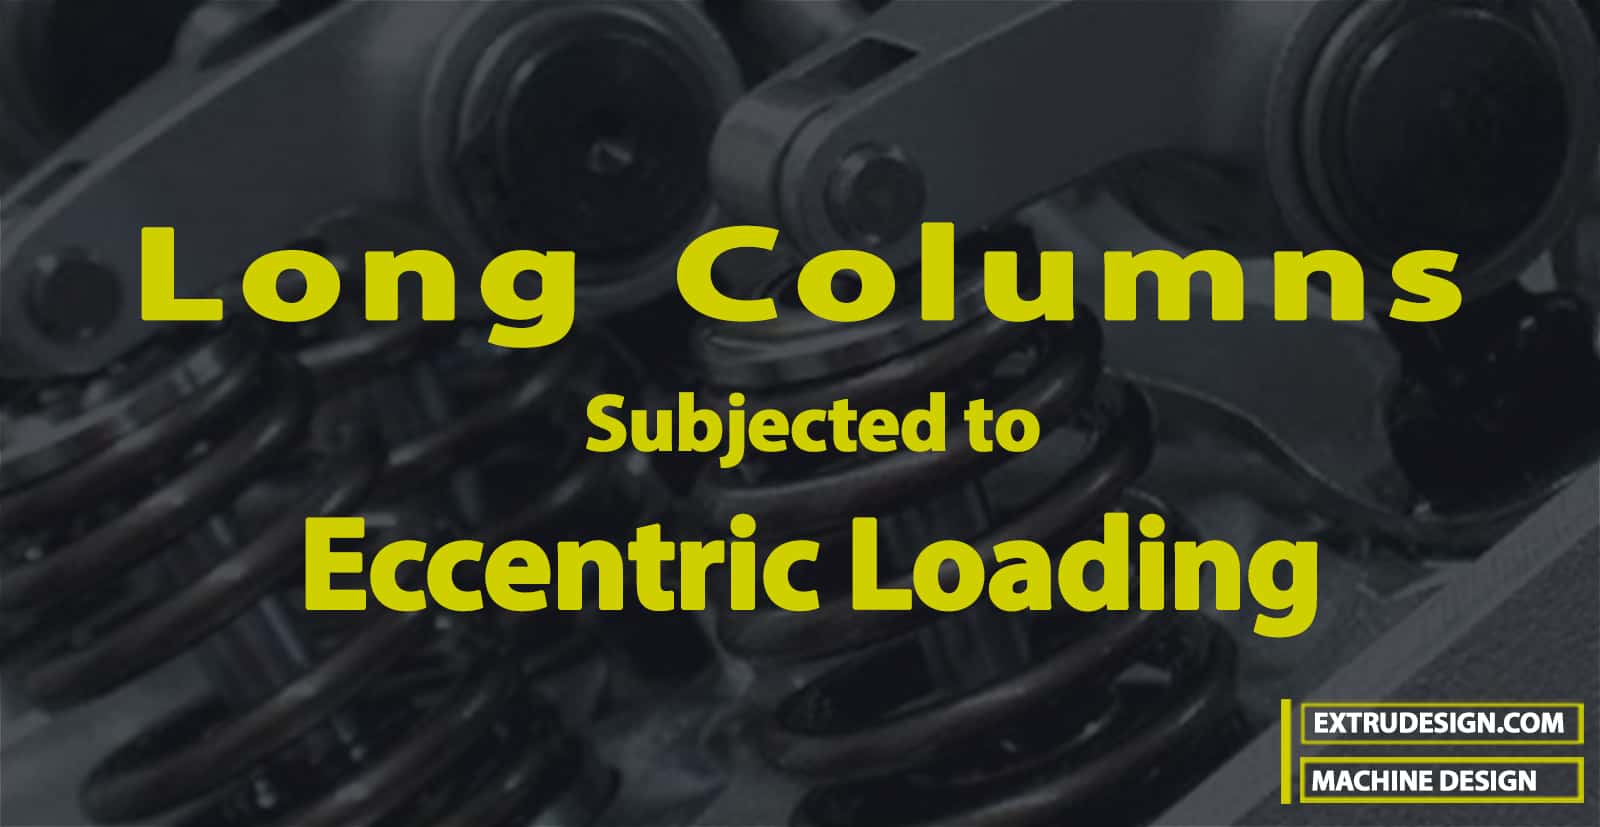 Long Columns Subjected to Eccentric Loading